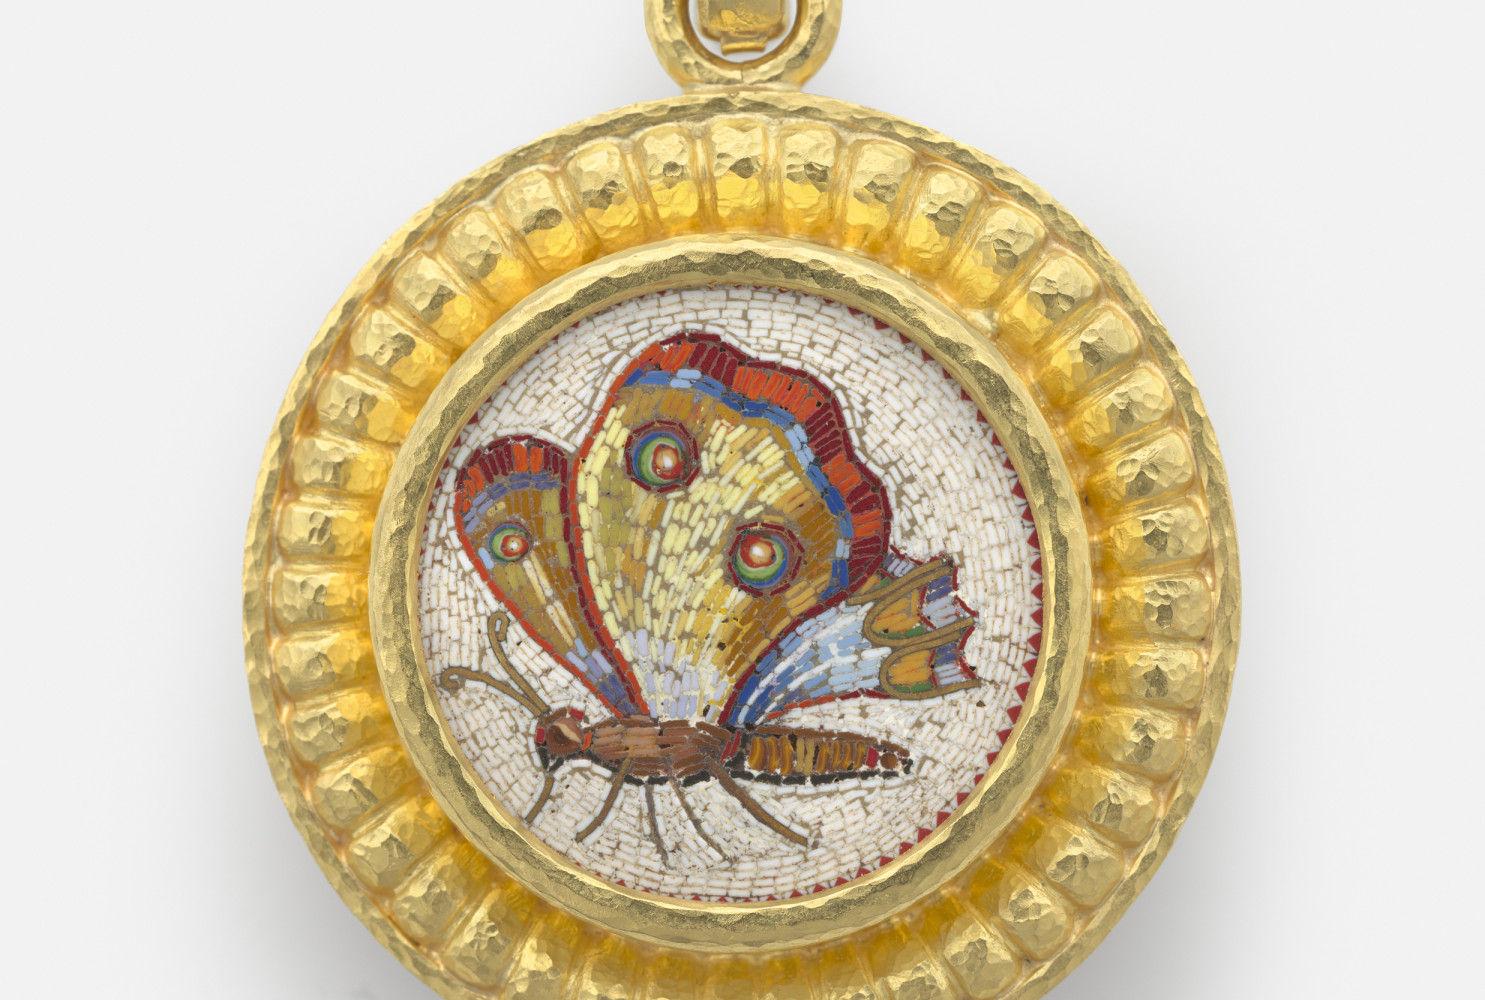 Walking Butterfly, 19th century, attributed to Giacomo Raffaelli (Italian, 1753–1836); Micromosaic set in gold as a pendant, with gold bezel, hinged bale; 35 x 35 mm; Collection of Elizabeth Locke

Photo: Travis Fullerton, Virginia Museum of Fine Arts
